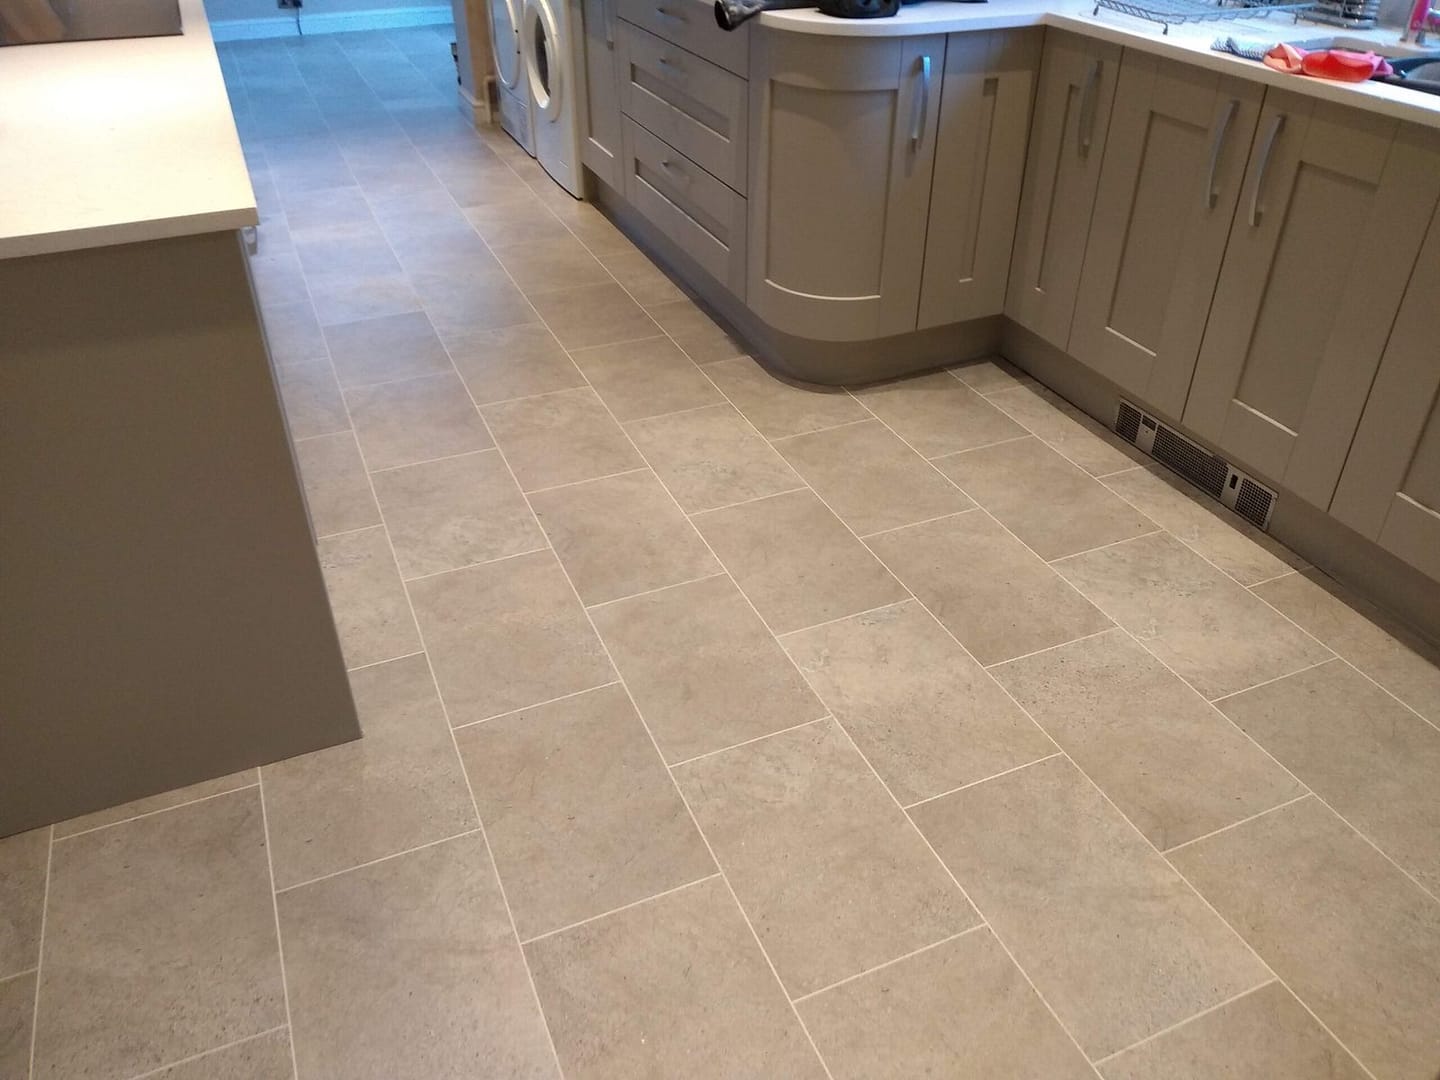 Fitted flooring in Ely, Cambridgeshire